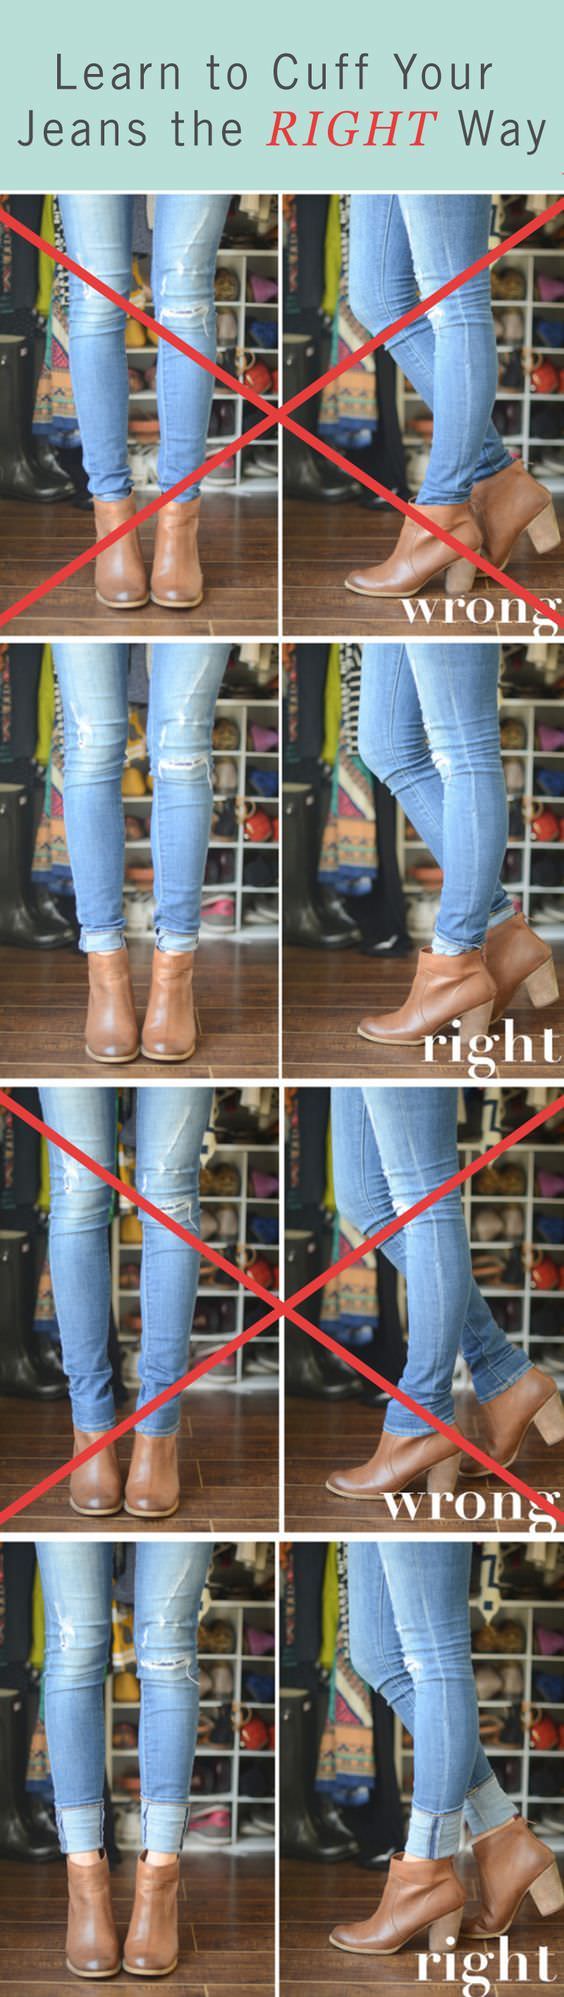 Learn to cuff your jeans properly to make ankle boots the most flattering on your leg!